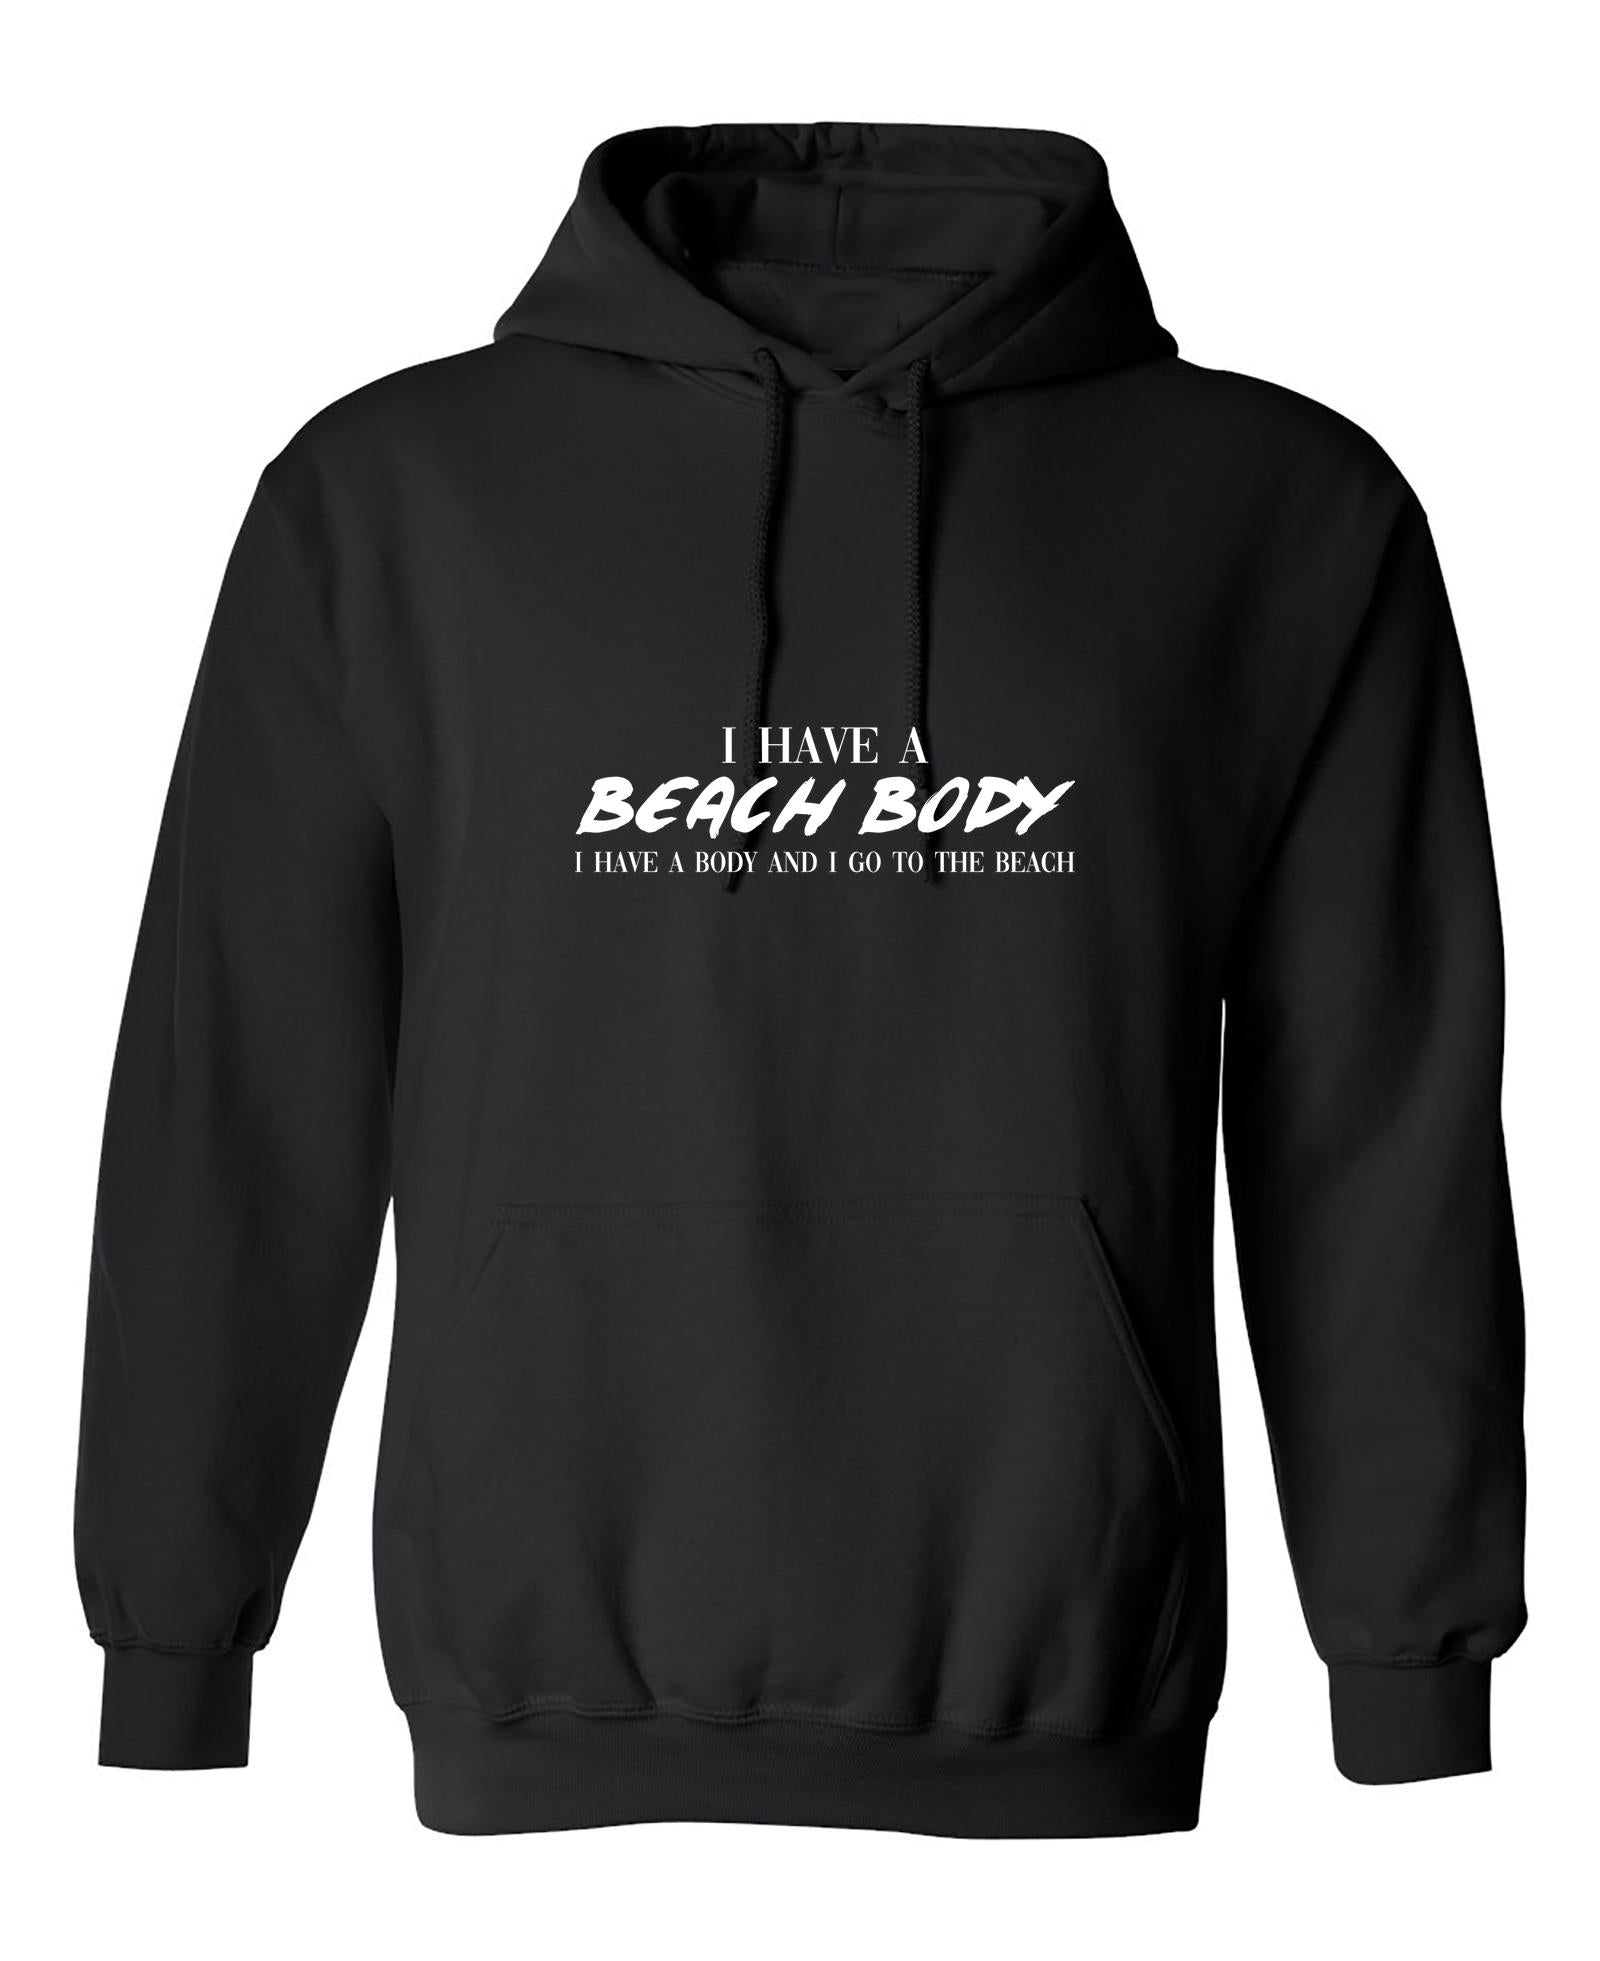 Funny T-Shirts design "I Have a Beach Body"